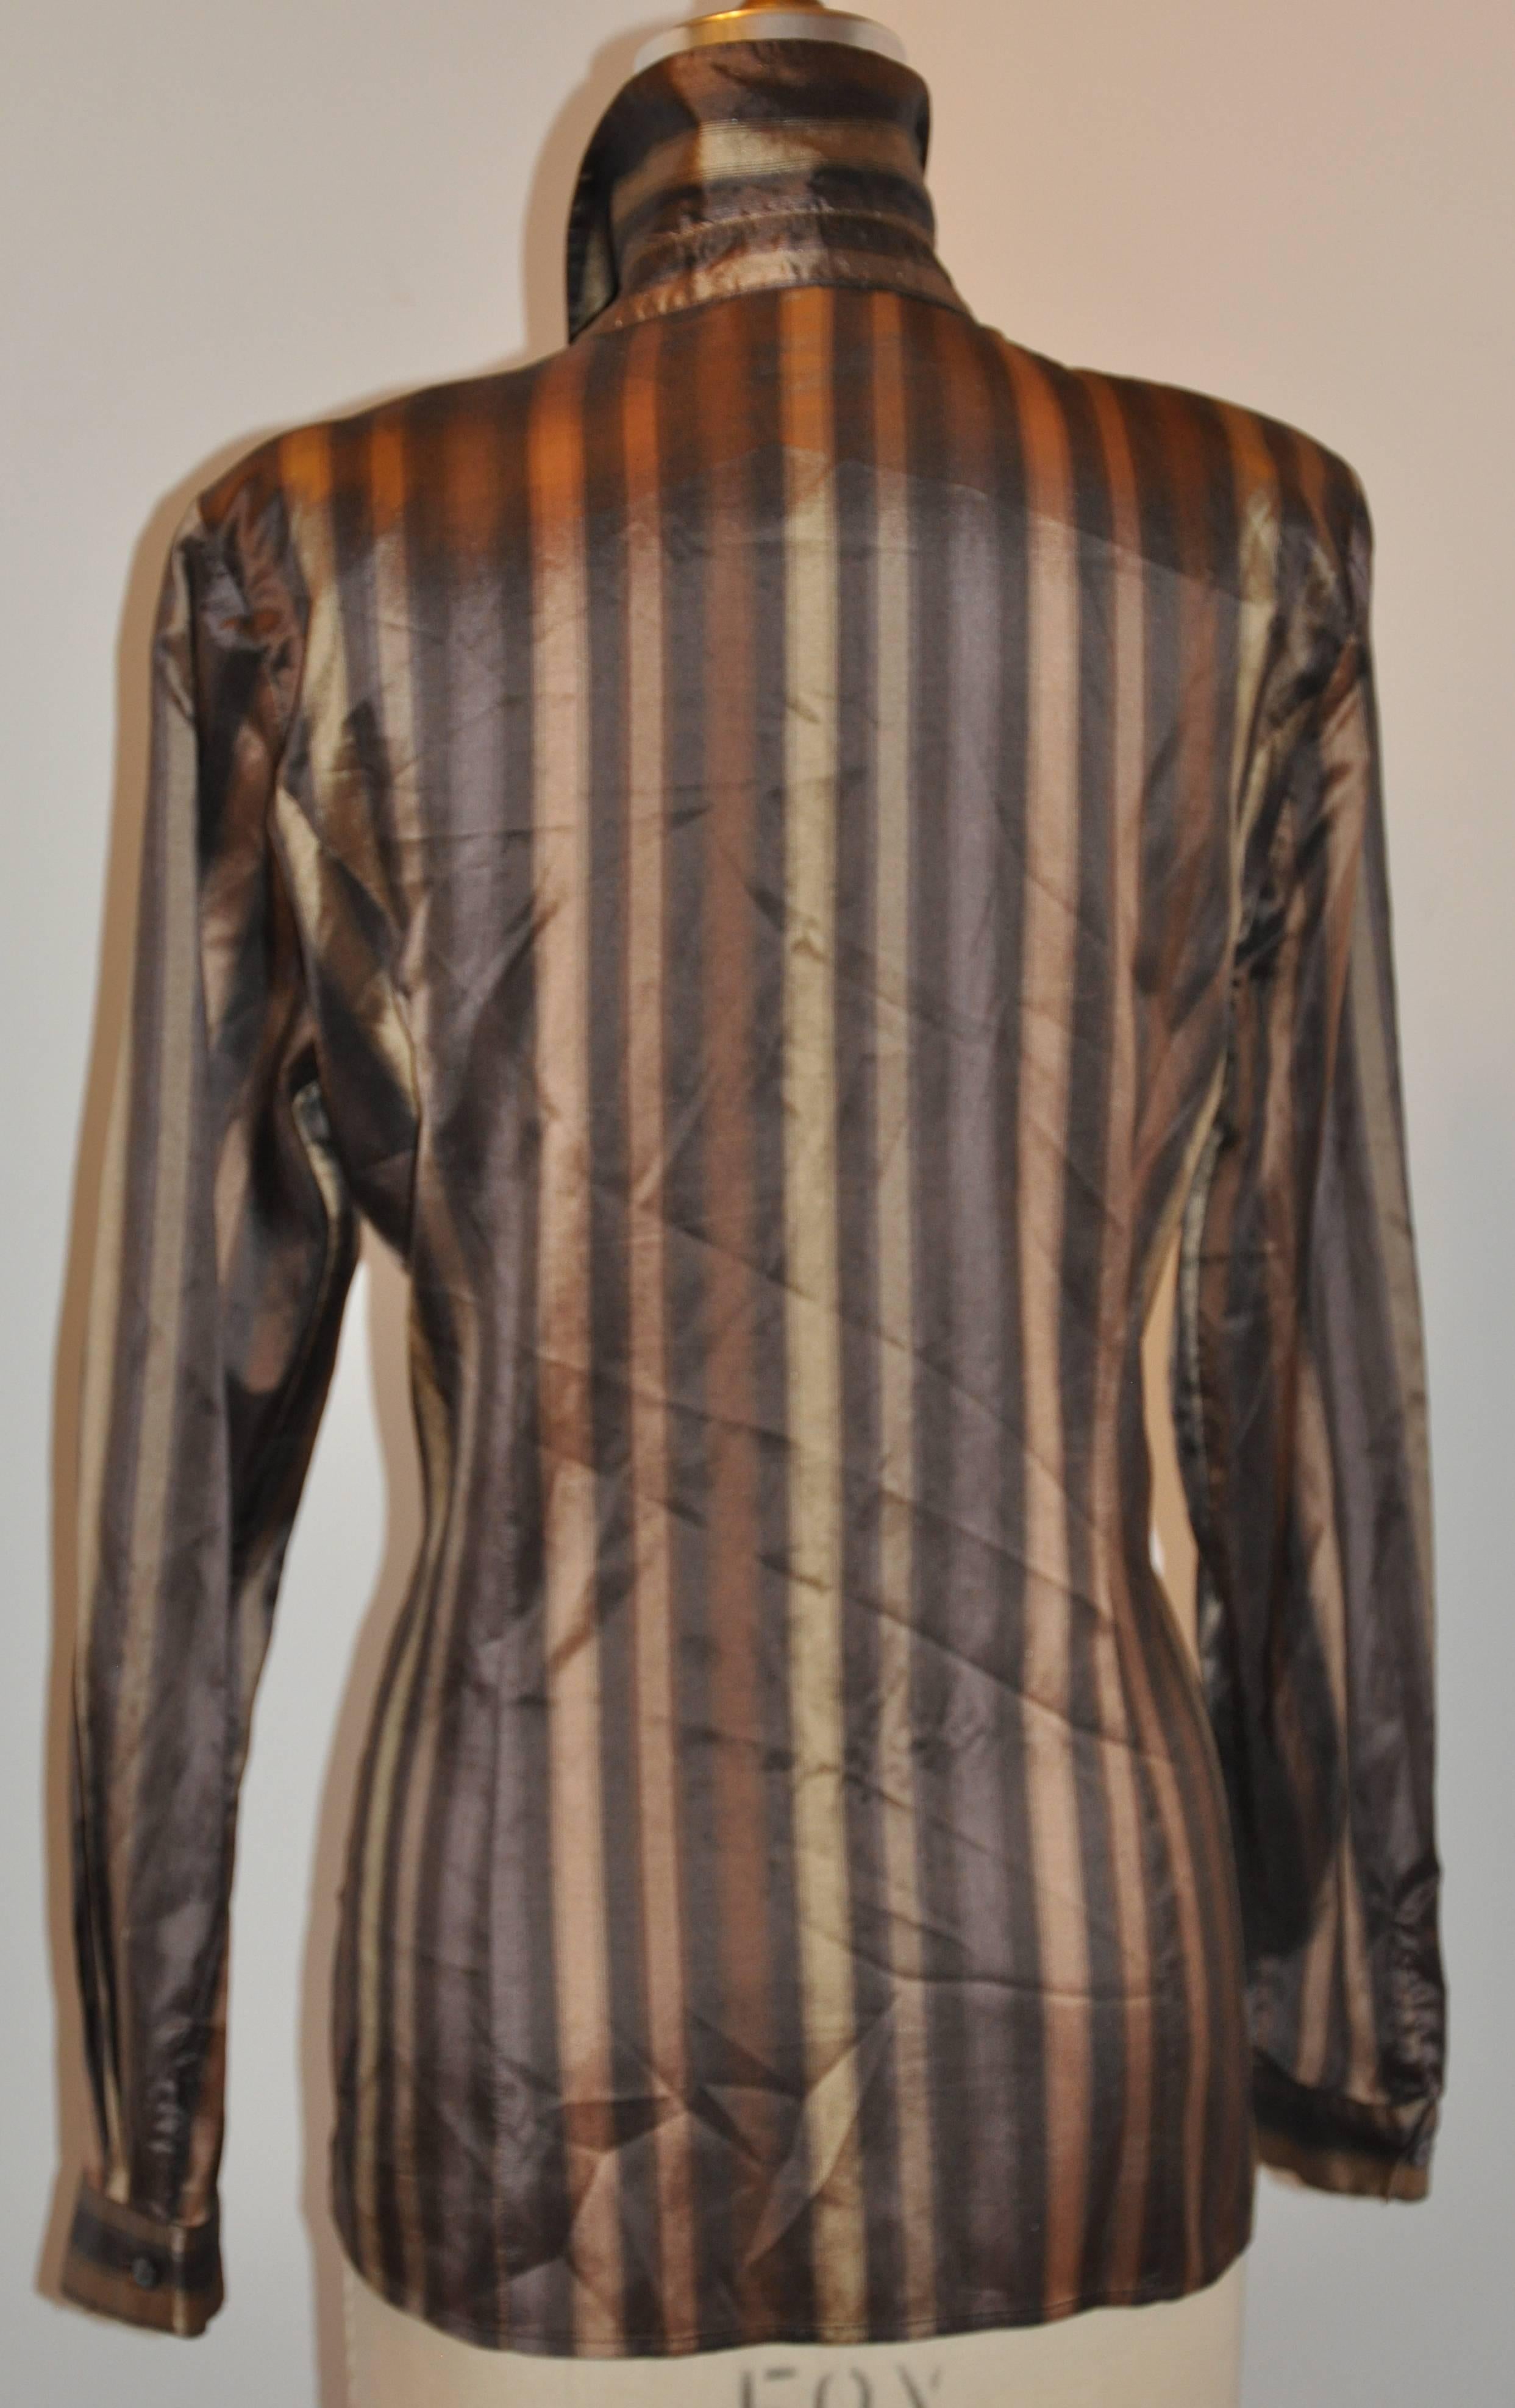        Jaeger wonderfully elegant Shades of bronze and gold multi-stripe silk button blouse has 8 buttons in front and measures 28 inches in length. There are two side slits measuring 4 1/4 inches as well as a single button on each cuff. The collar